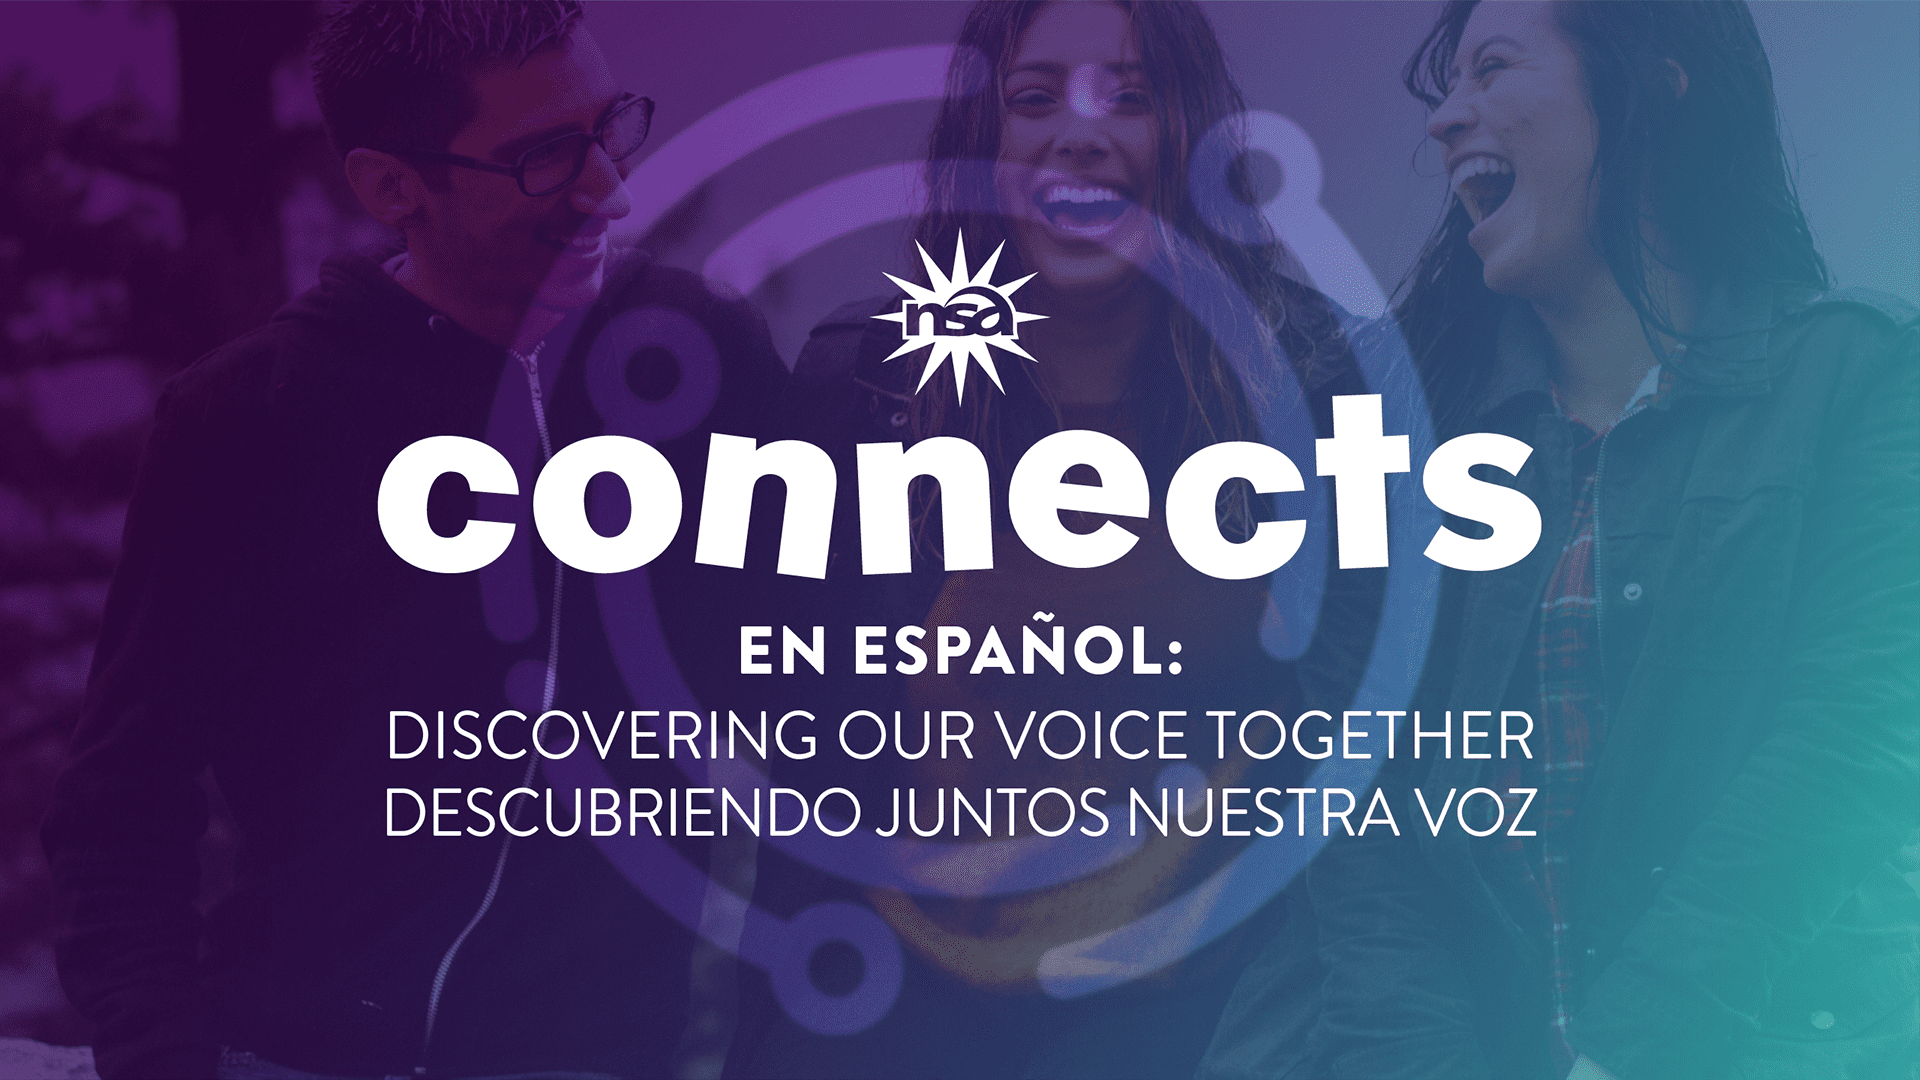 Promotional graphic for "NBA connects en Español" featuring three joyful people laughing together overlaid with text about discovering our voice together.